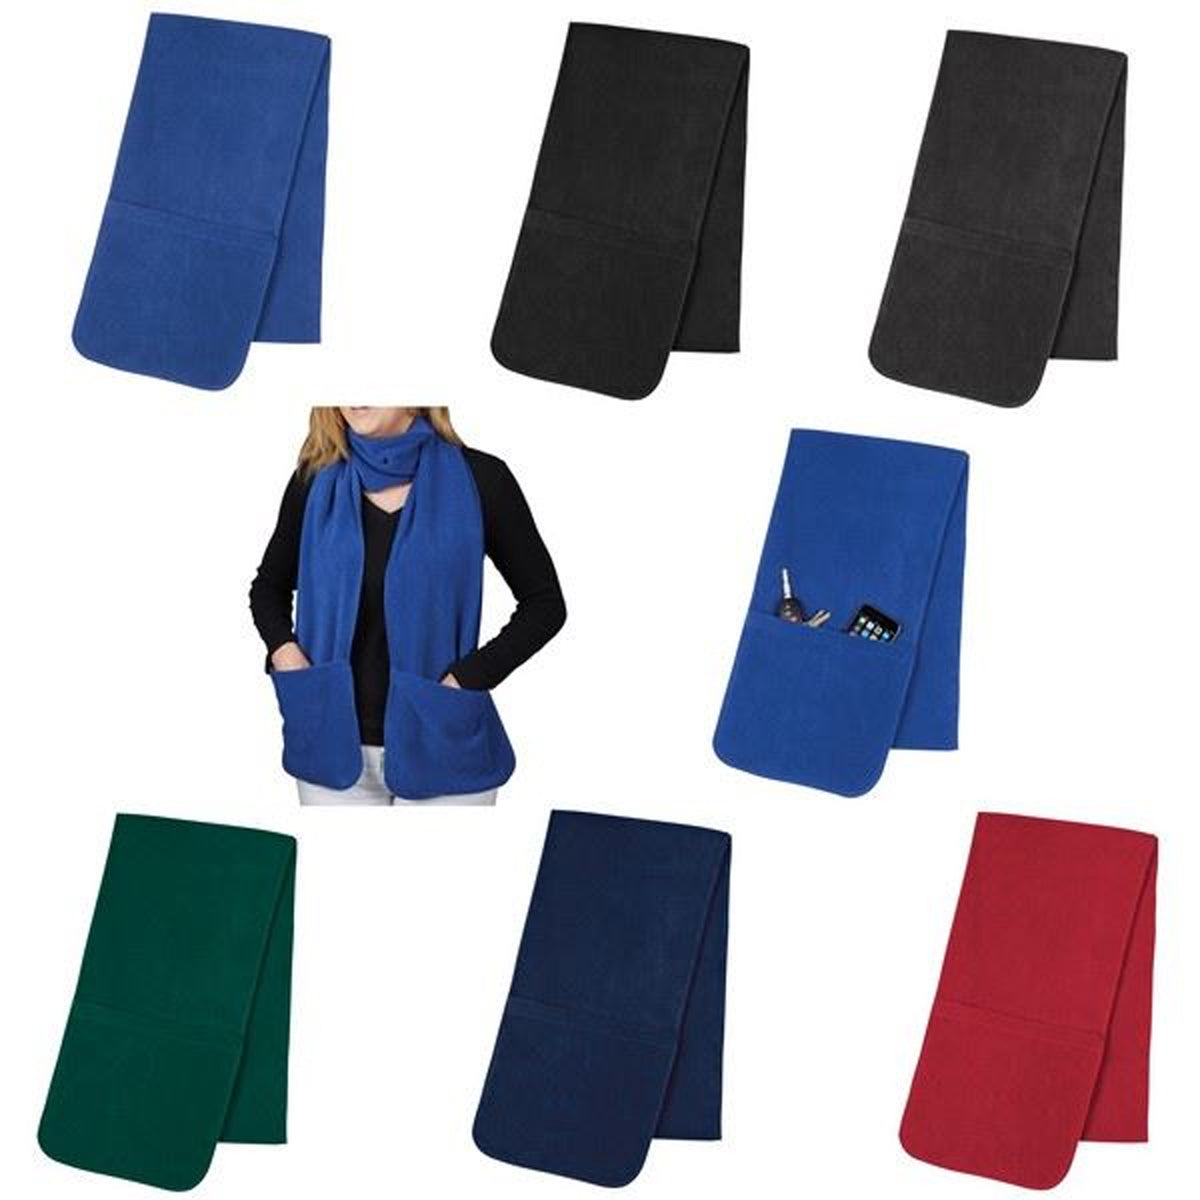 Wholesale Fleece Scarf with pocket- Assorted